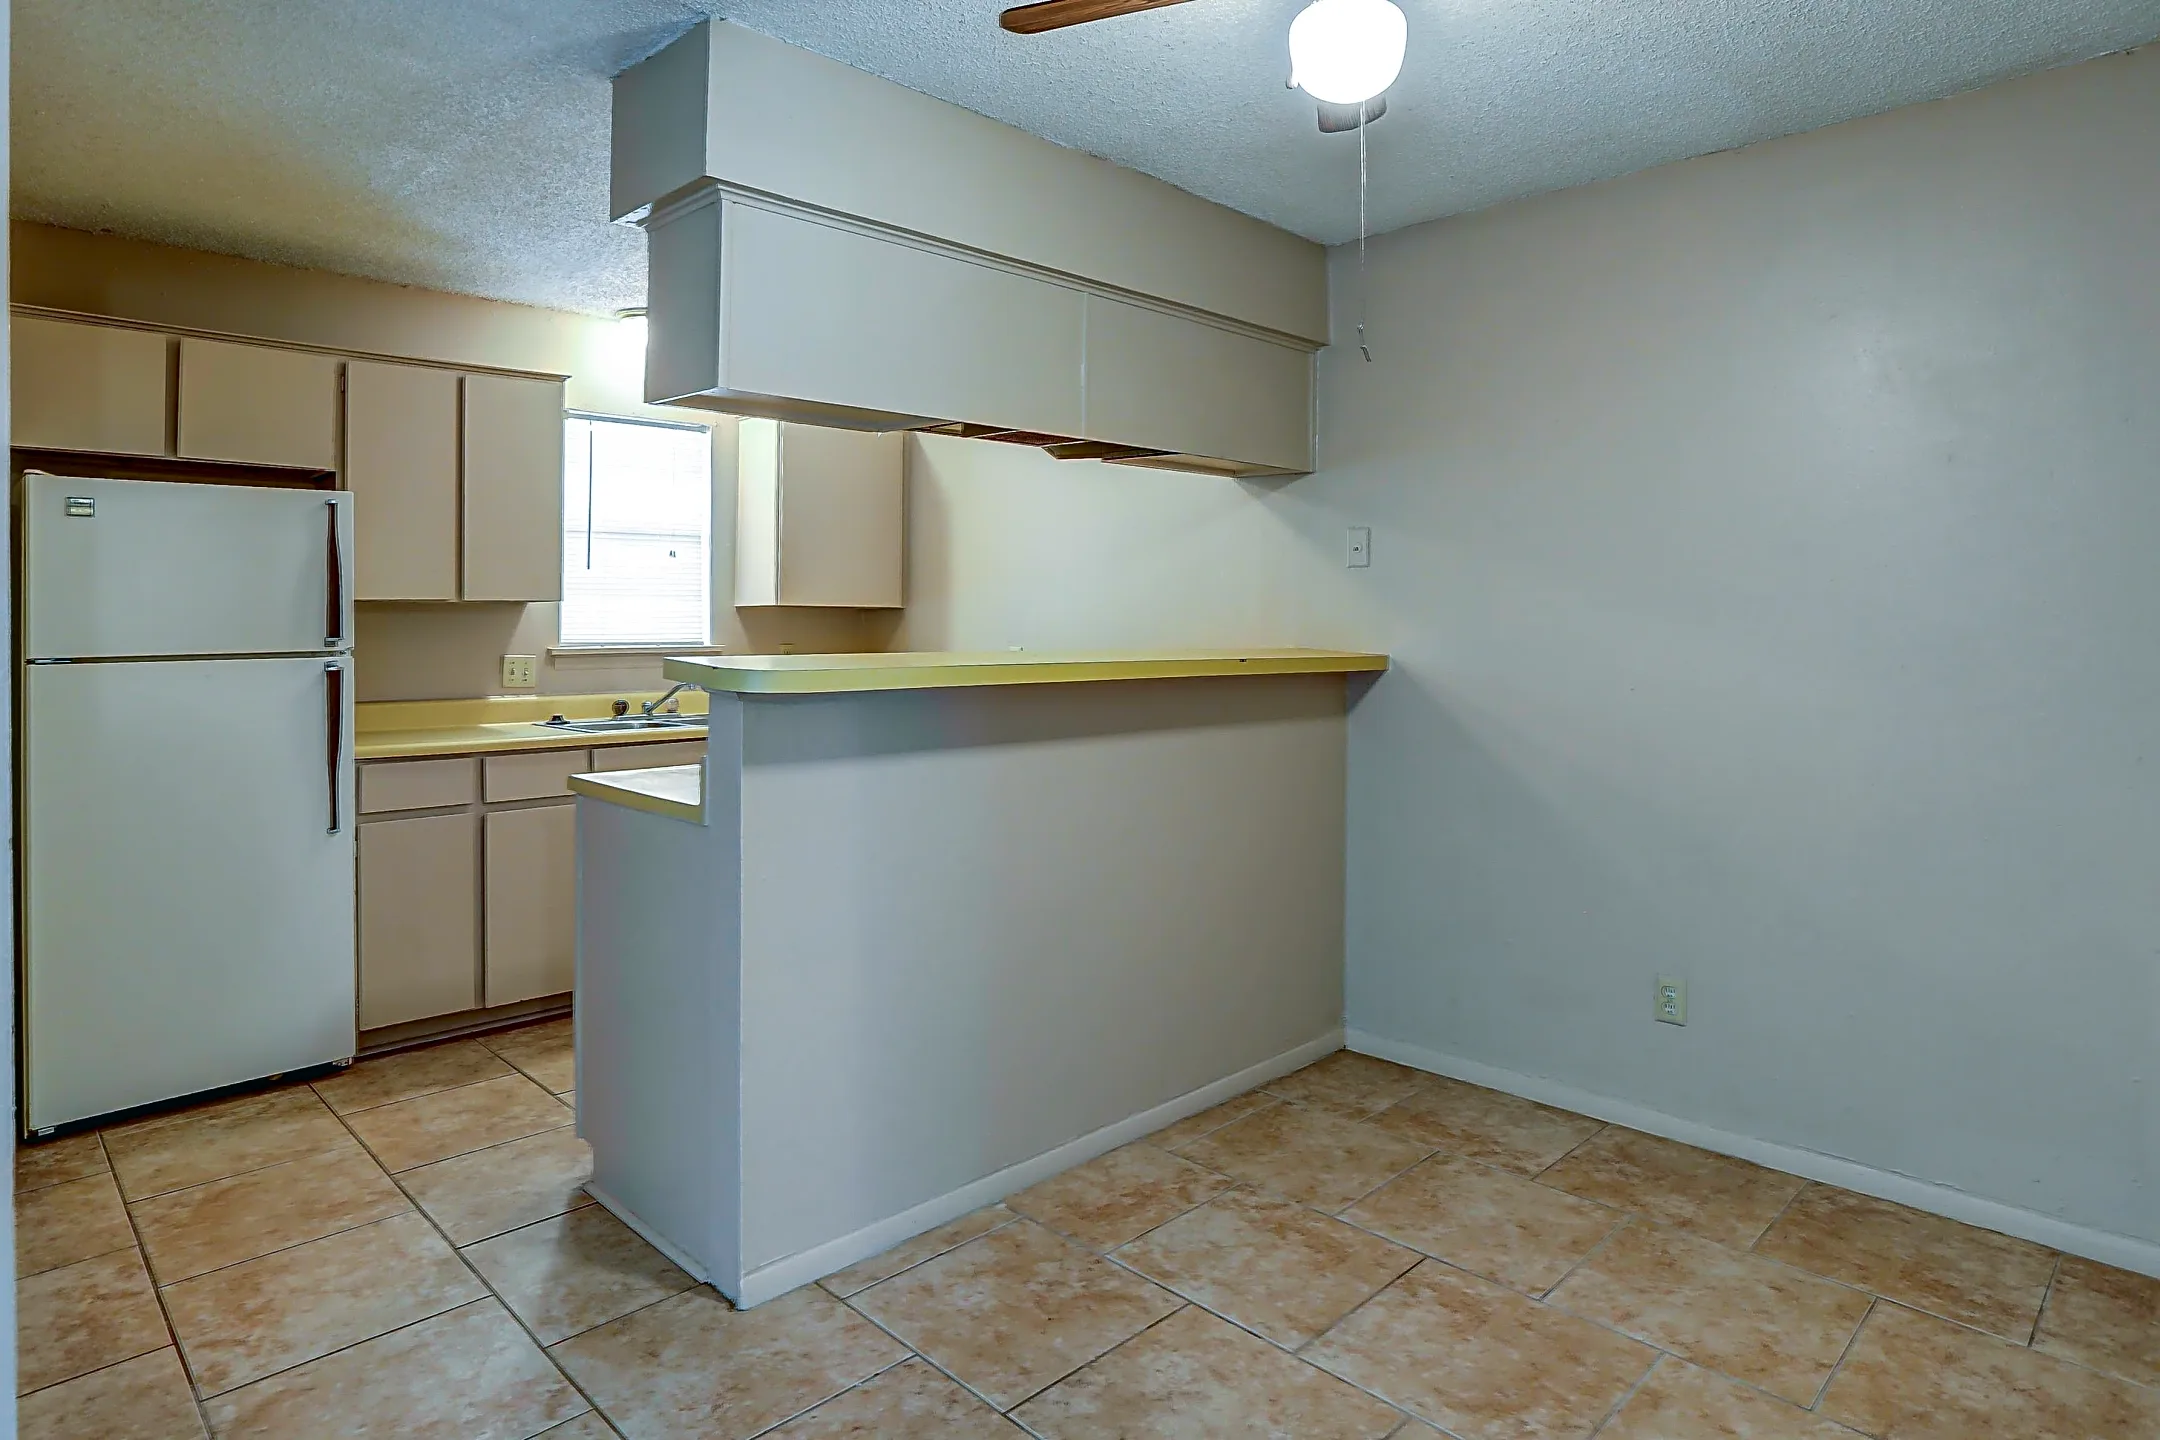 Kitchen - Southbrooke Apartments - Fort Smith, AR